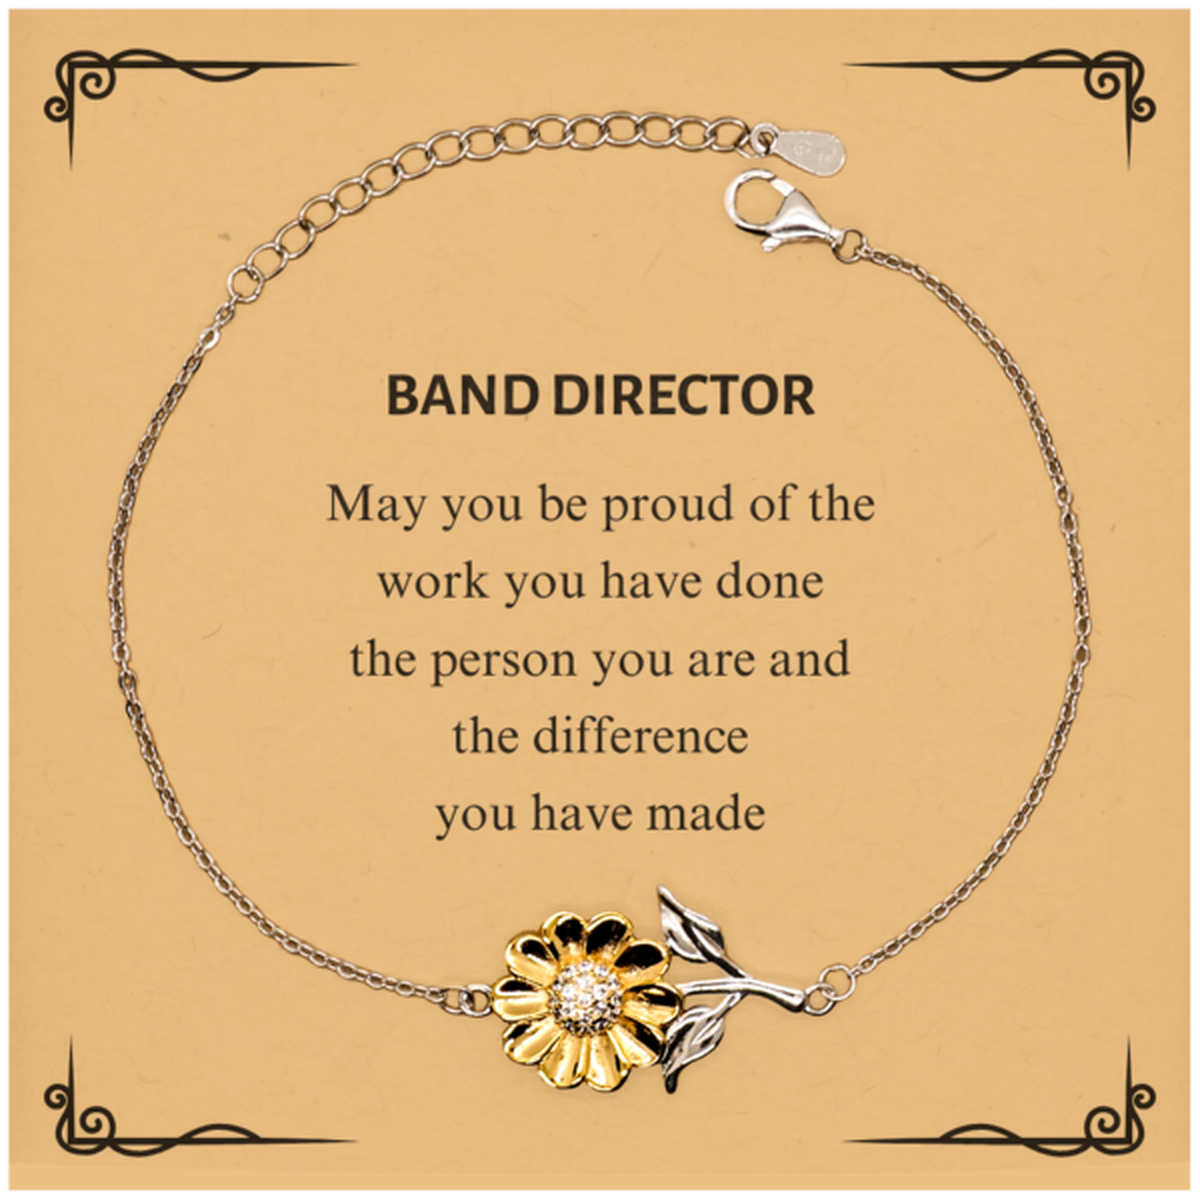 Band Director May you be proud of the work you have done, Retirement Band Director Sunflower Bracelet for Colleague Appreciation Gifts Amazing for Band Director